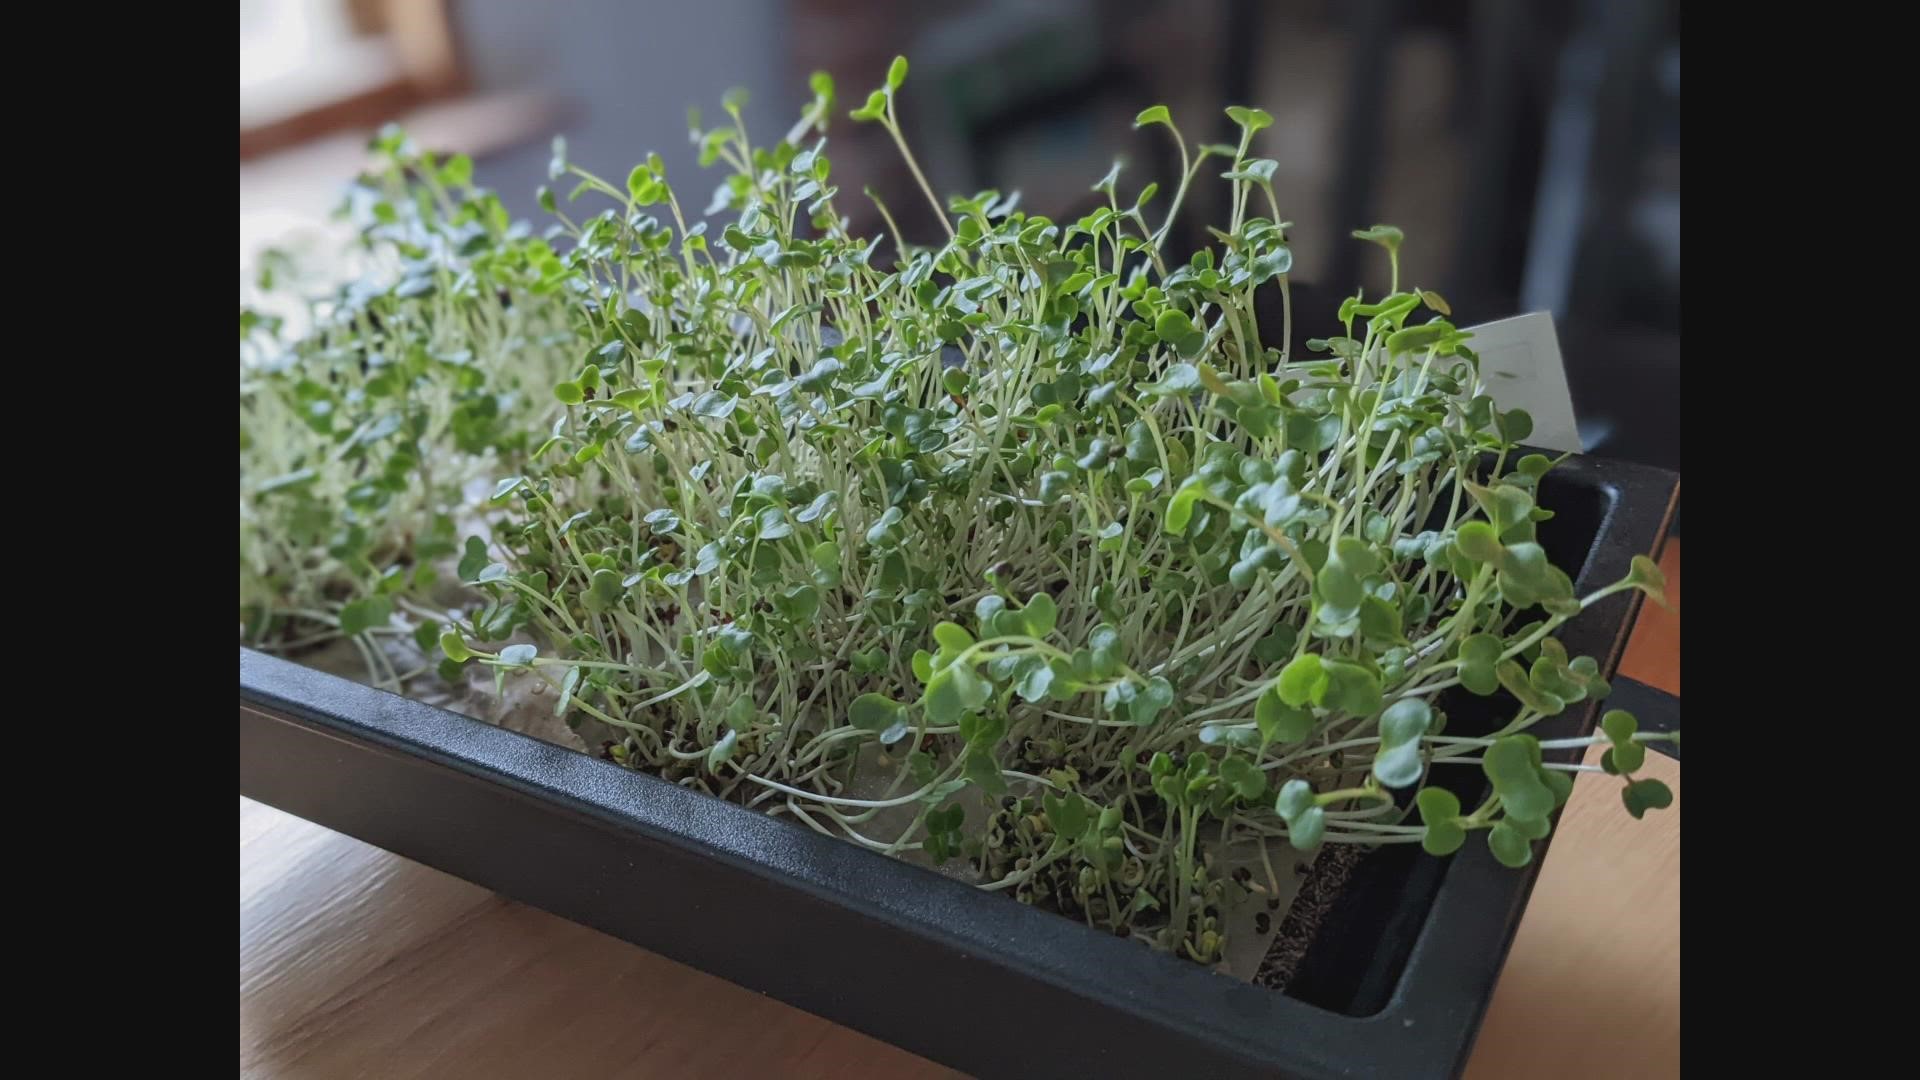 University of Maine researchers believe these sprouts may promote the growth of beneficial bacteria in our guts, and can have anti-inflammatory properties.